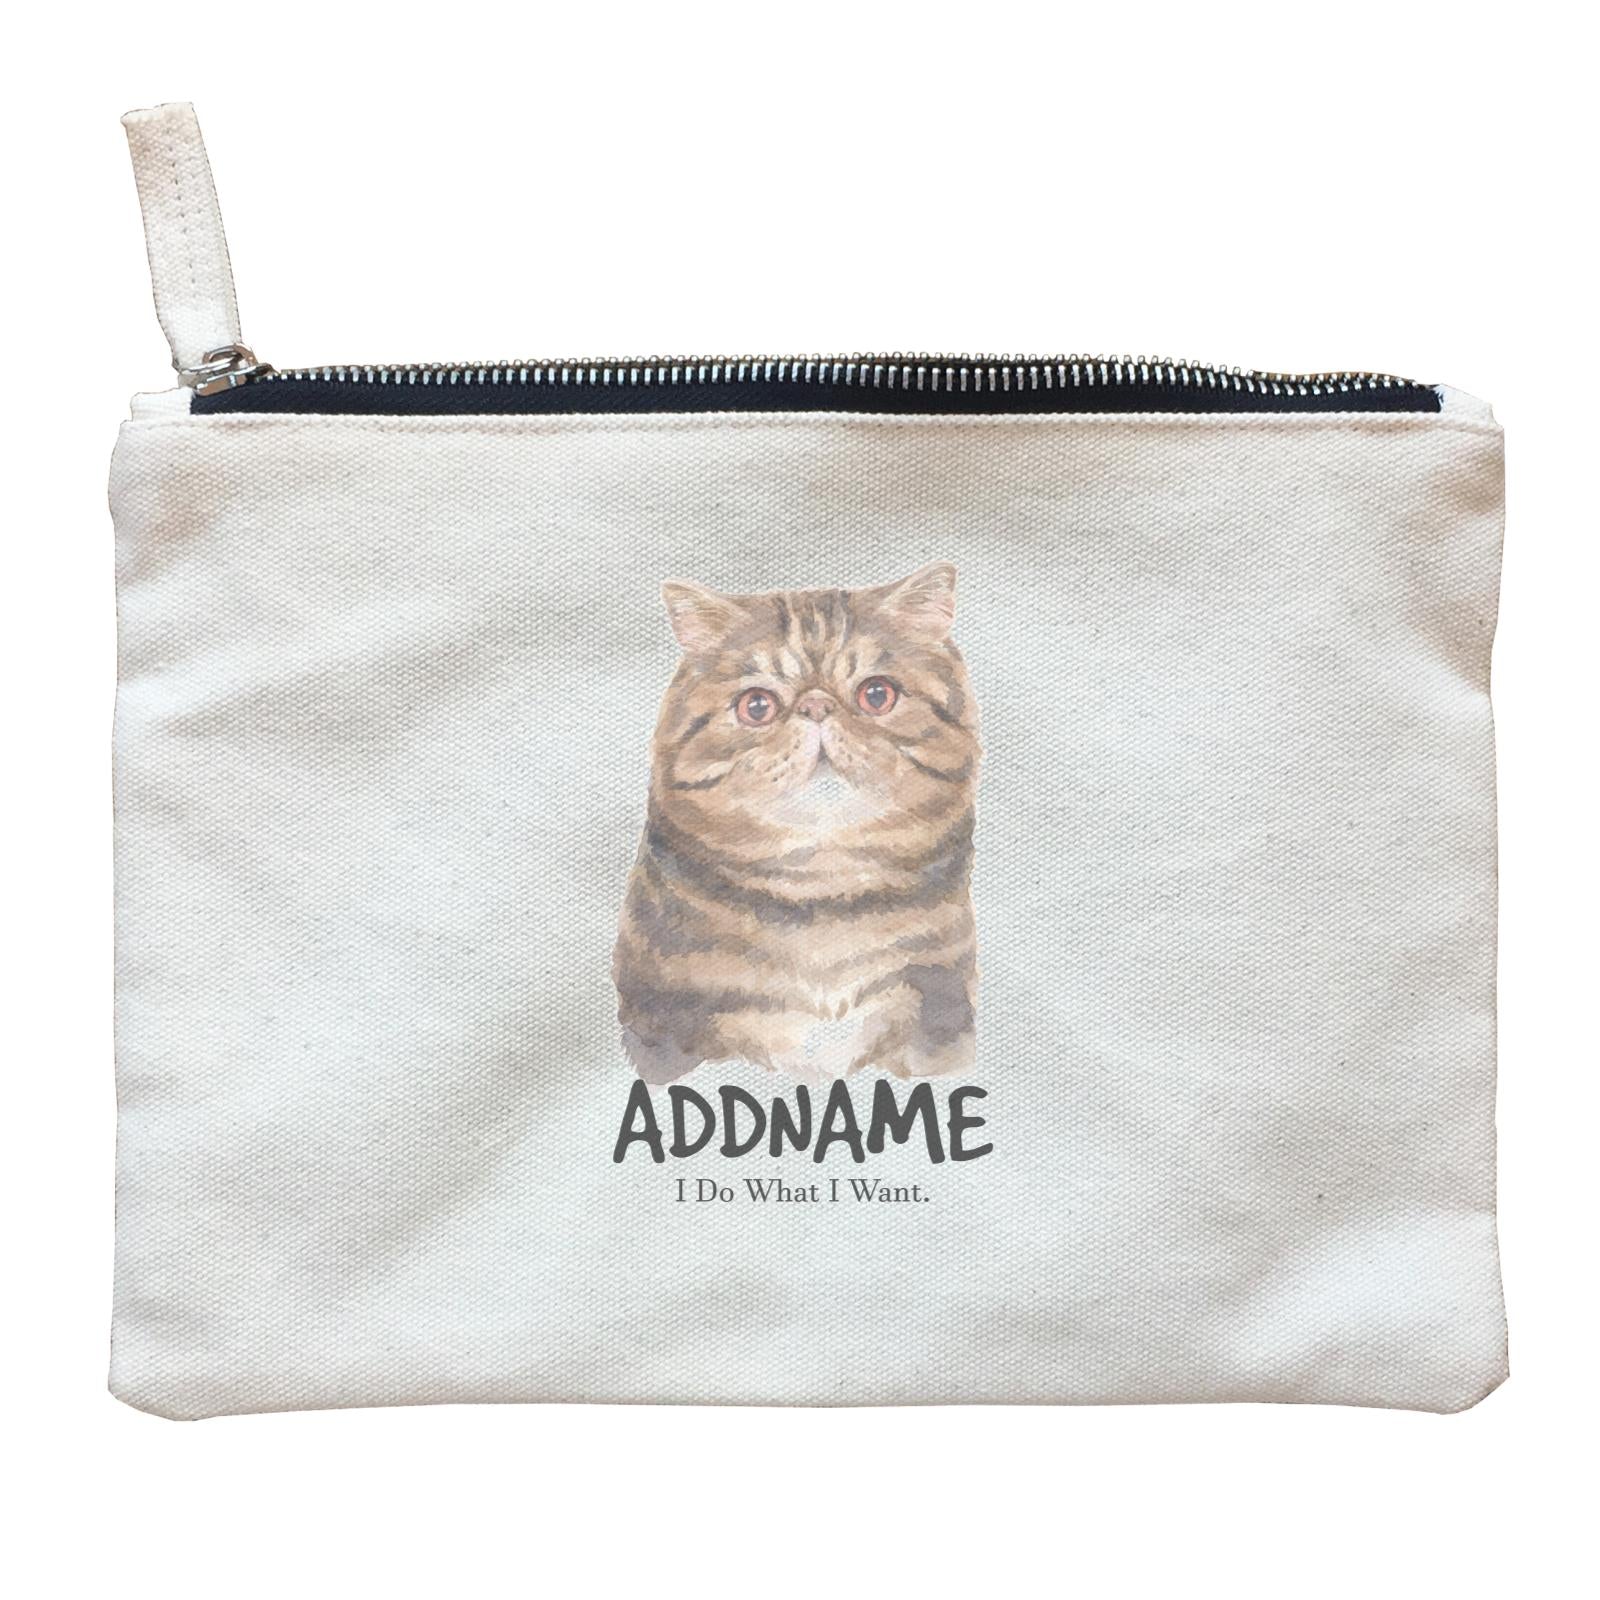 Watercolor Cat Exotic Shorthair I Do What I Want Addname Zipper Pouch